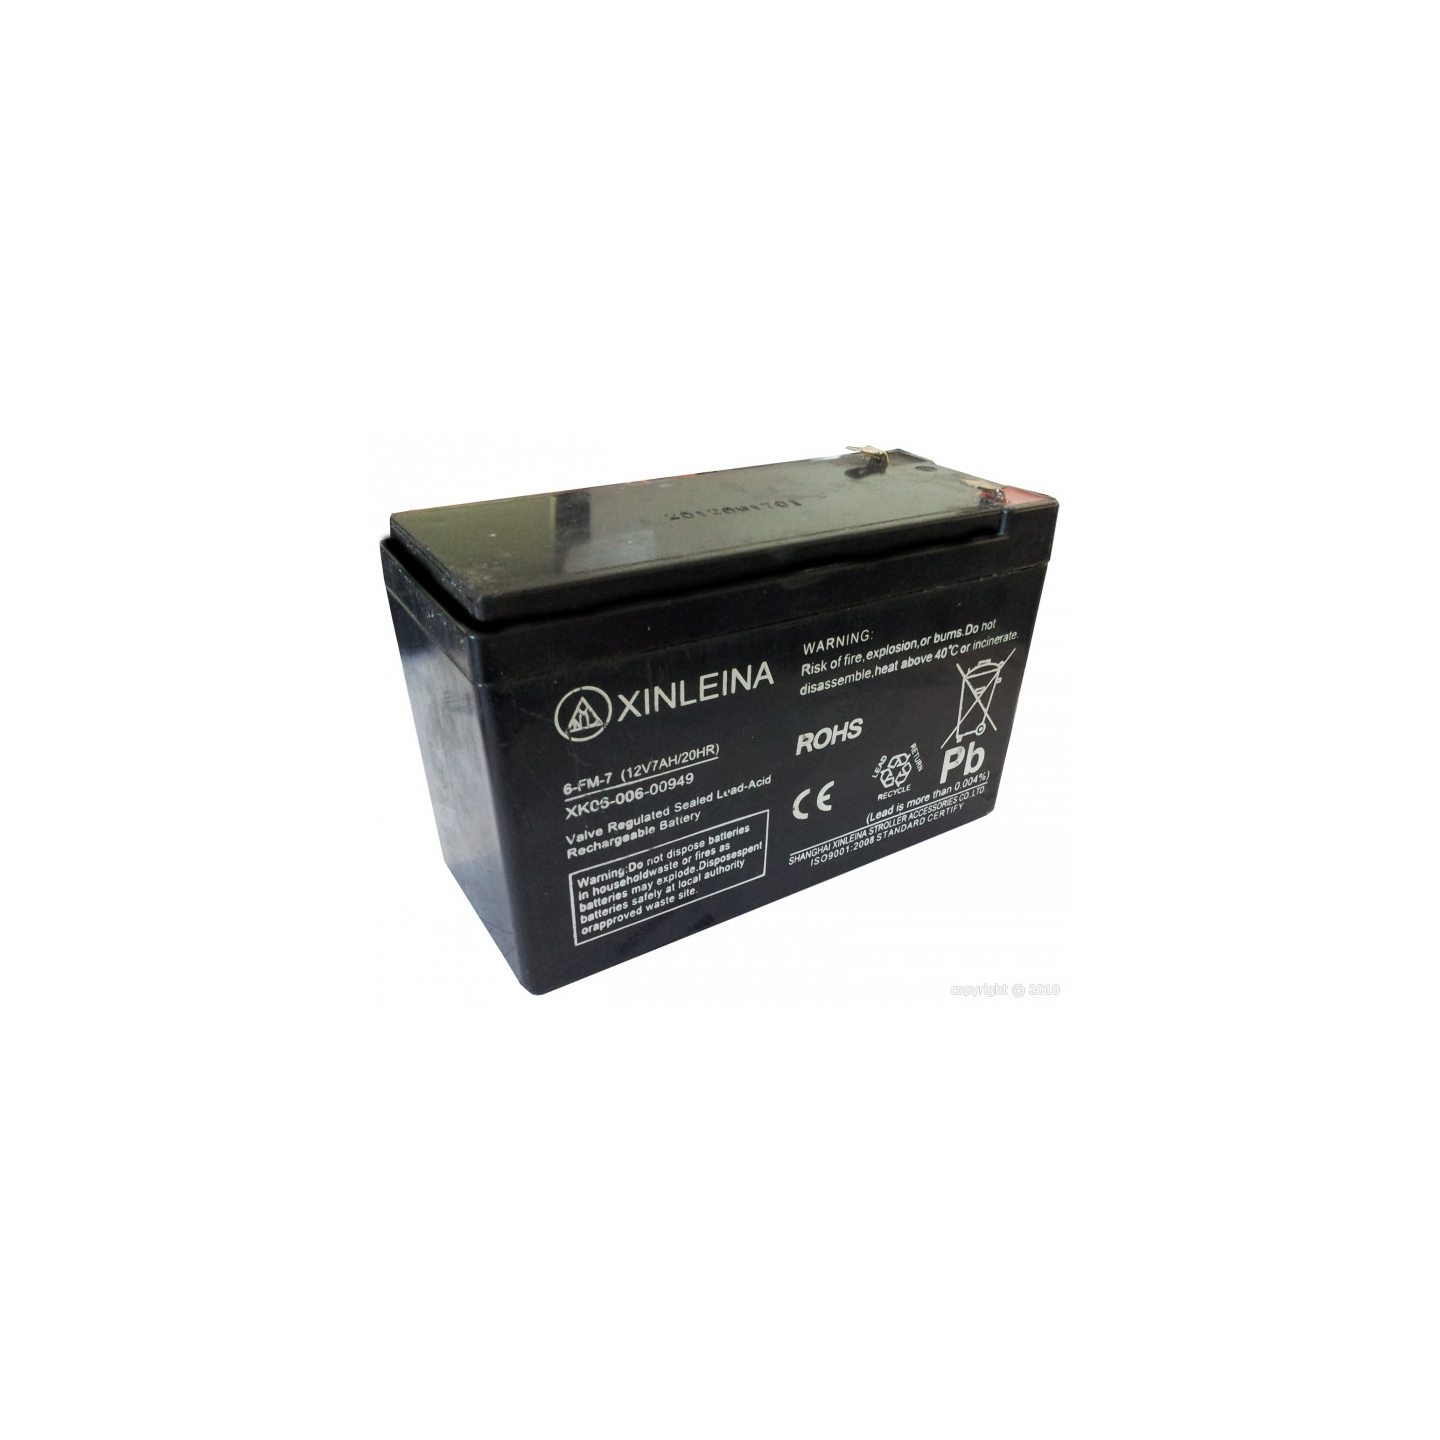 CHARGEUR BATTERIE 12V - 7A - 9 phases full auto + Accessoires